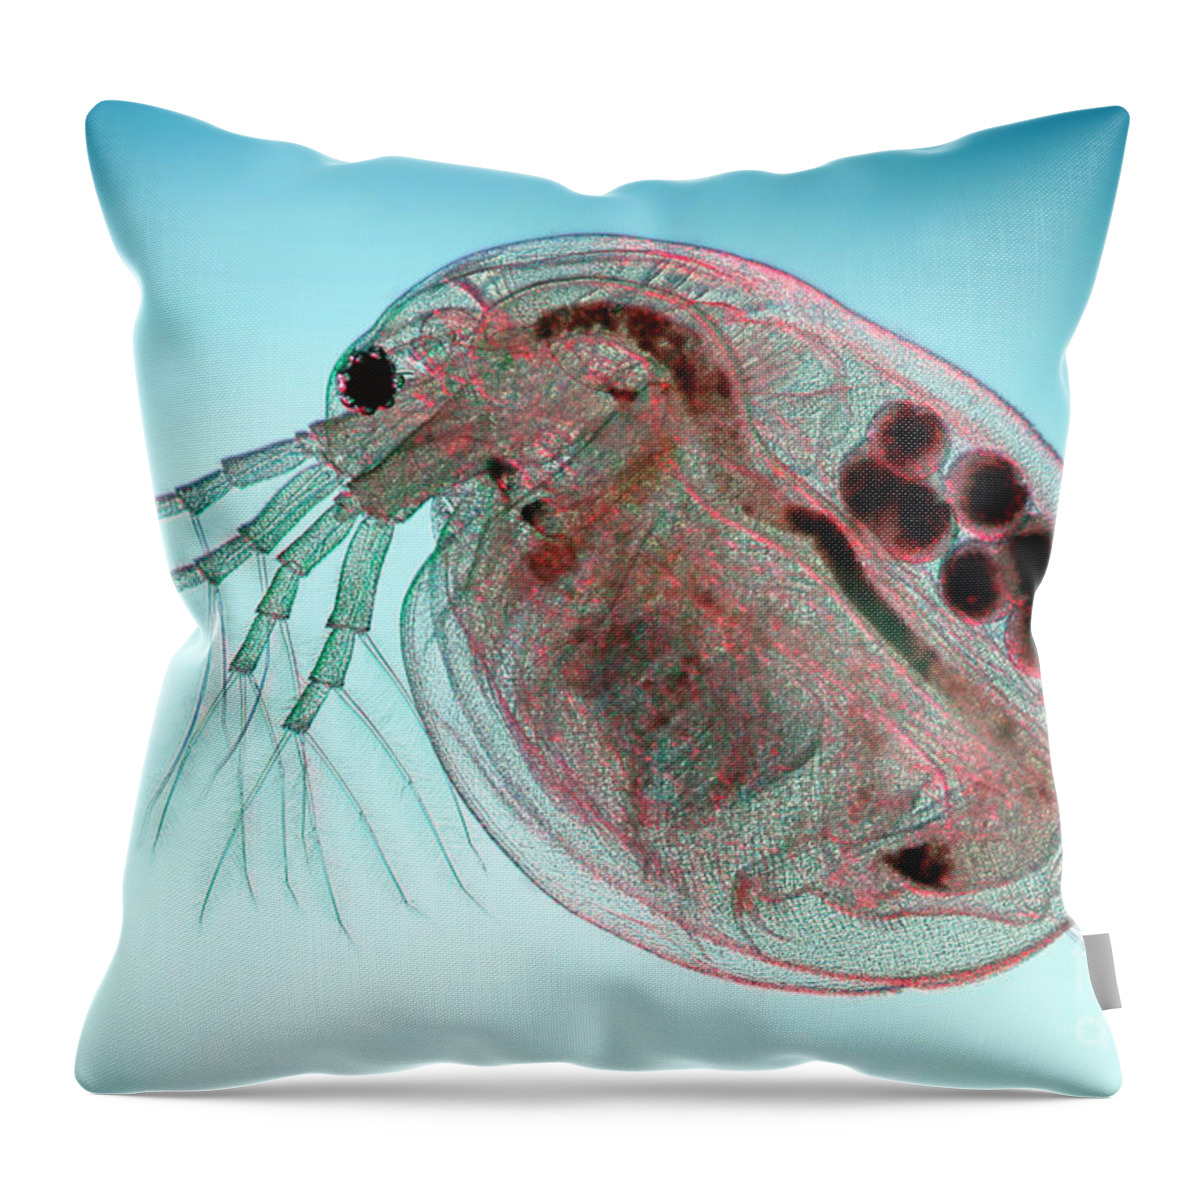 Water Flea Throw Pillow featuring the photograph Water Flea Daphnia Magna by Ted Kinsman